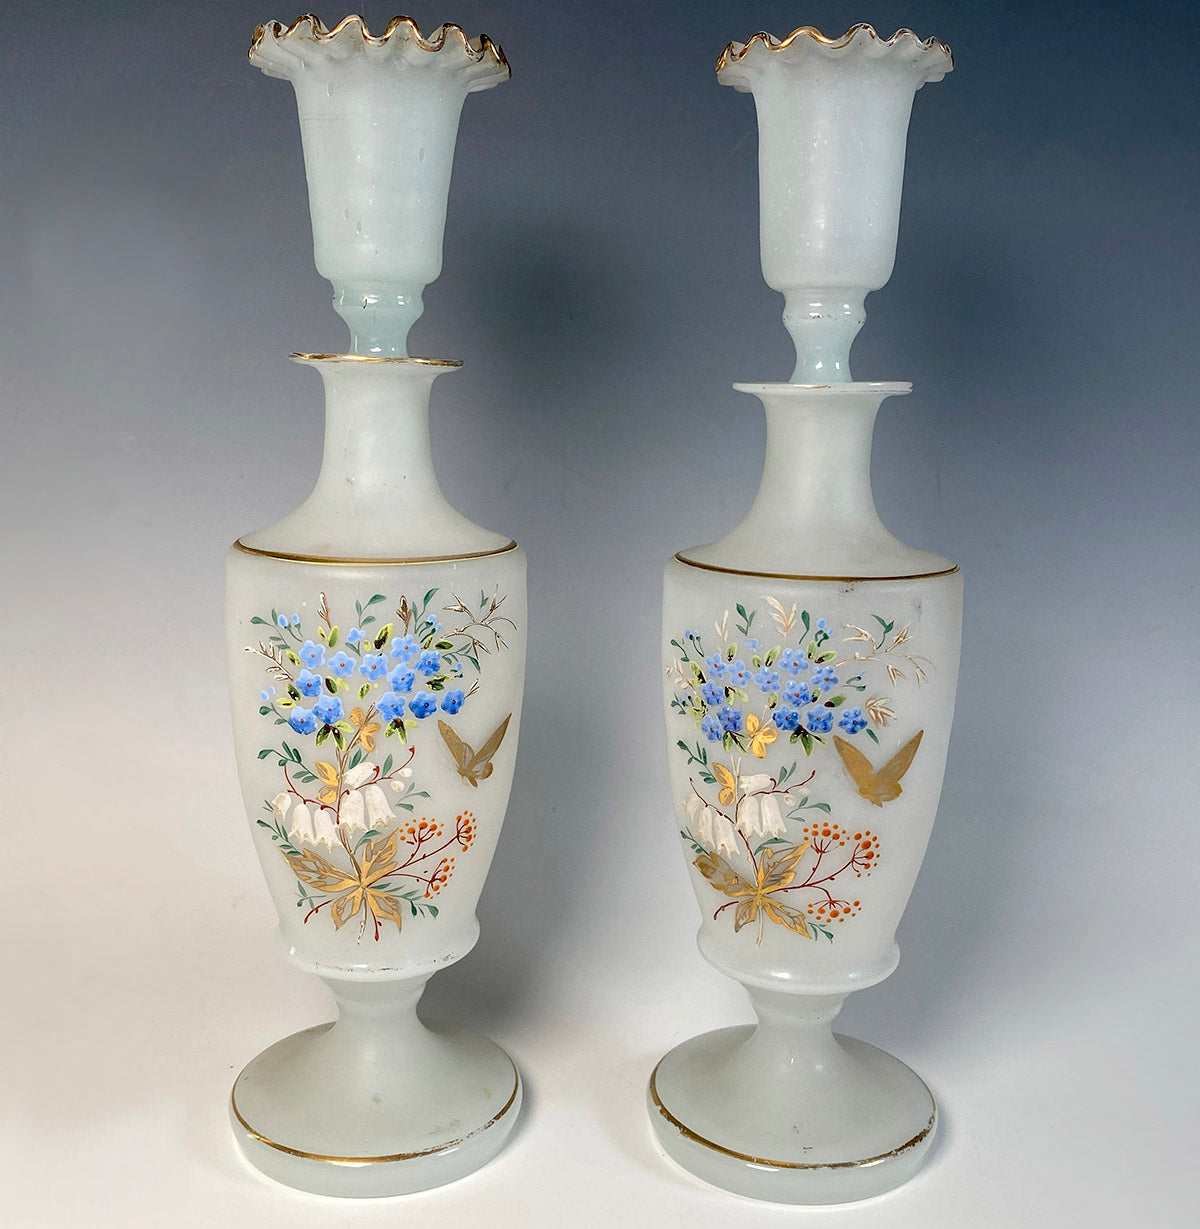 Pair of 11" Tall Antique French Raised Enamel Decanters, Liqueur or Cologne, Butterflies, Flowers